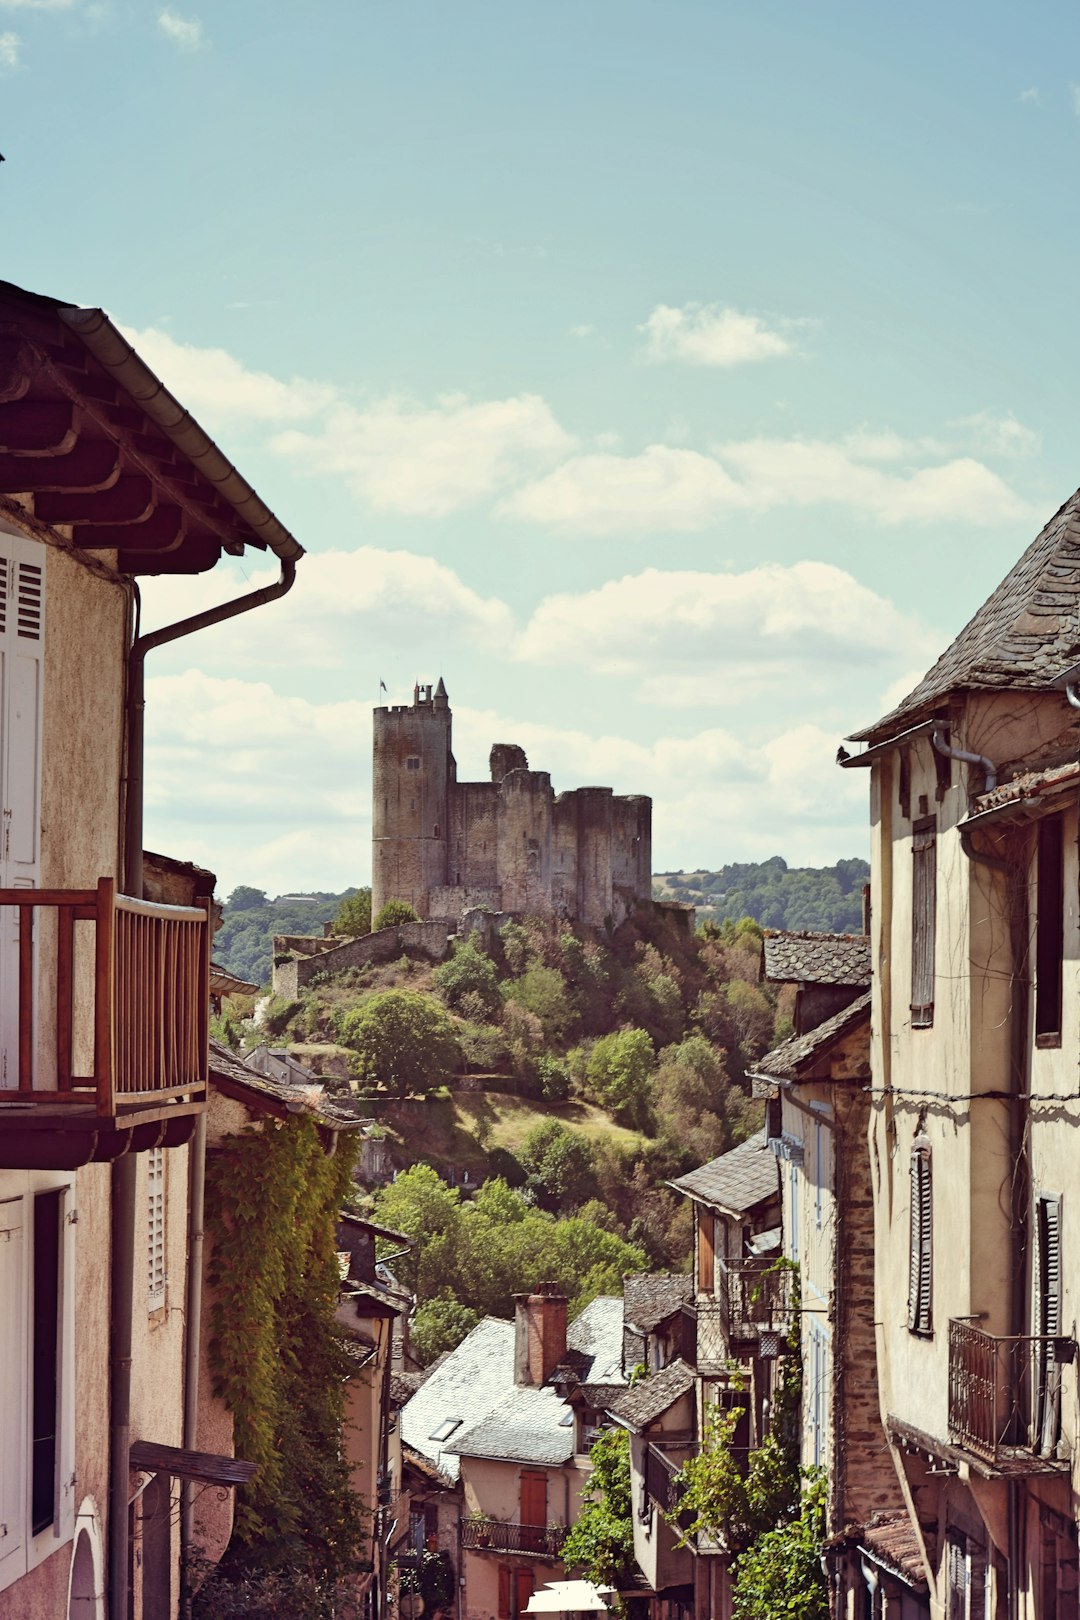 Travel Tips and Stories of Najac in France